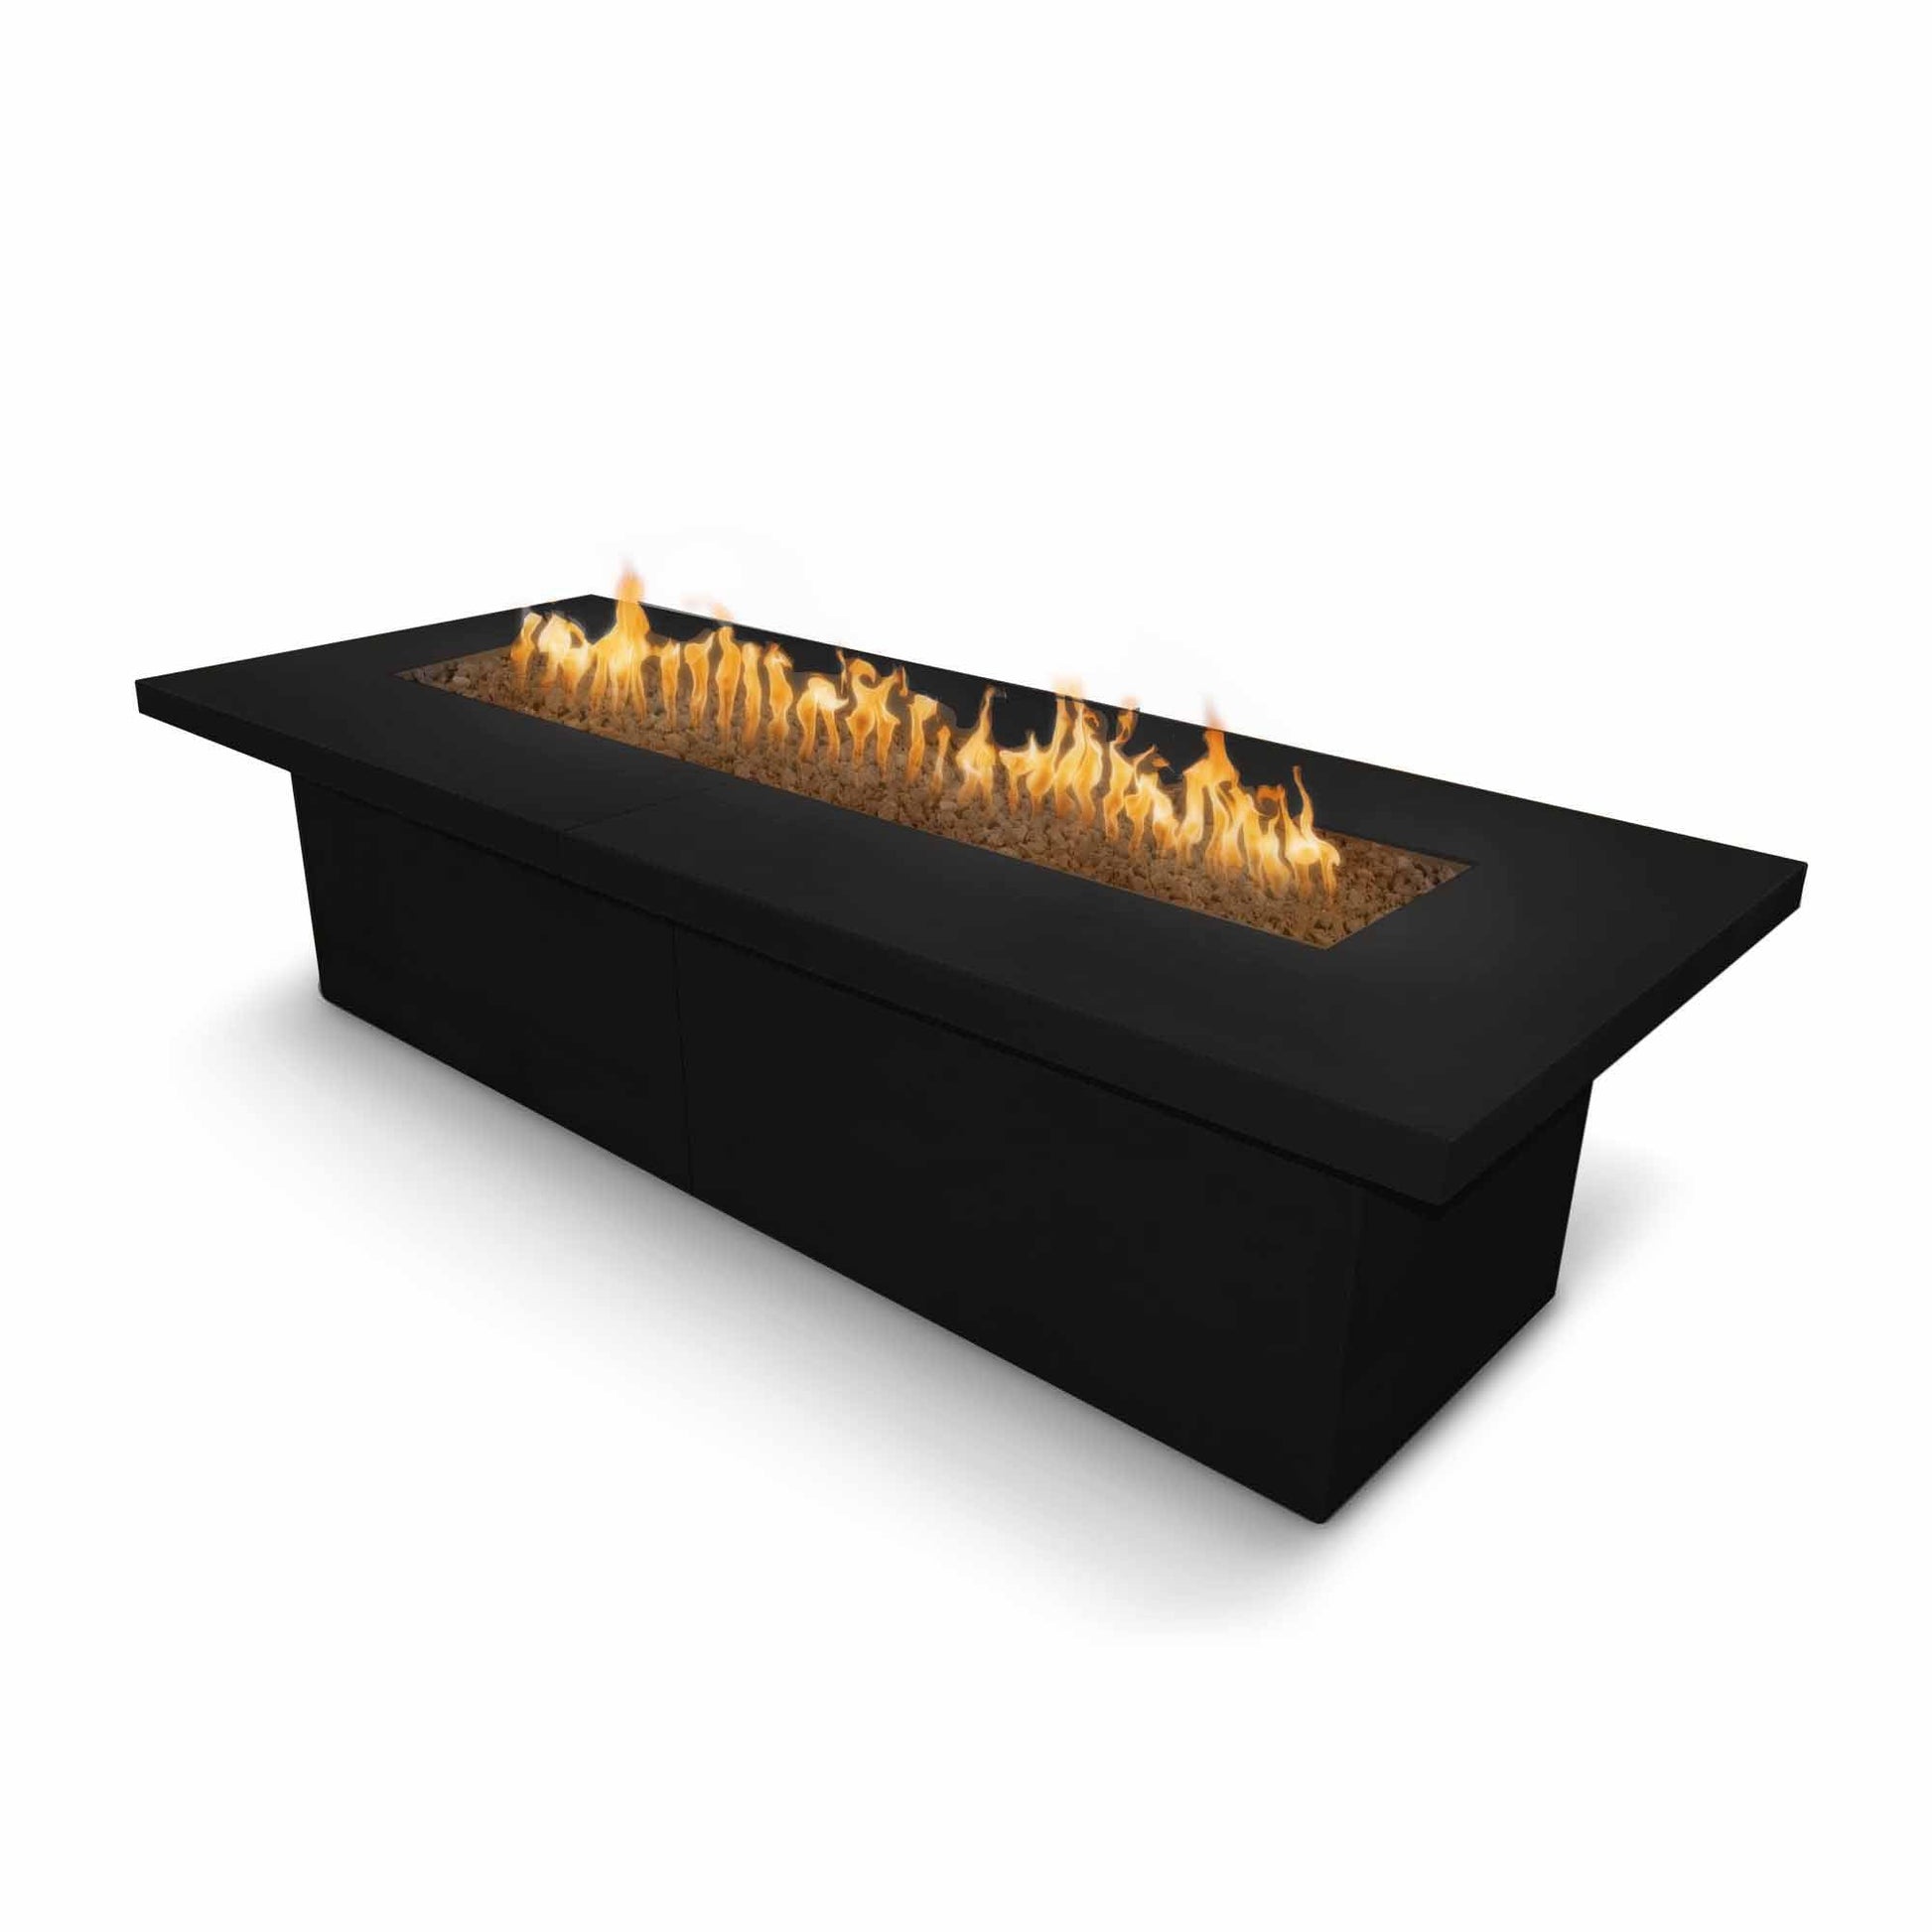 The Outdoor Plus Rectangular Newport 120" Java Powder Coated Metal Liquid Propane Fire Pit with 12V Electronic Ignition